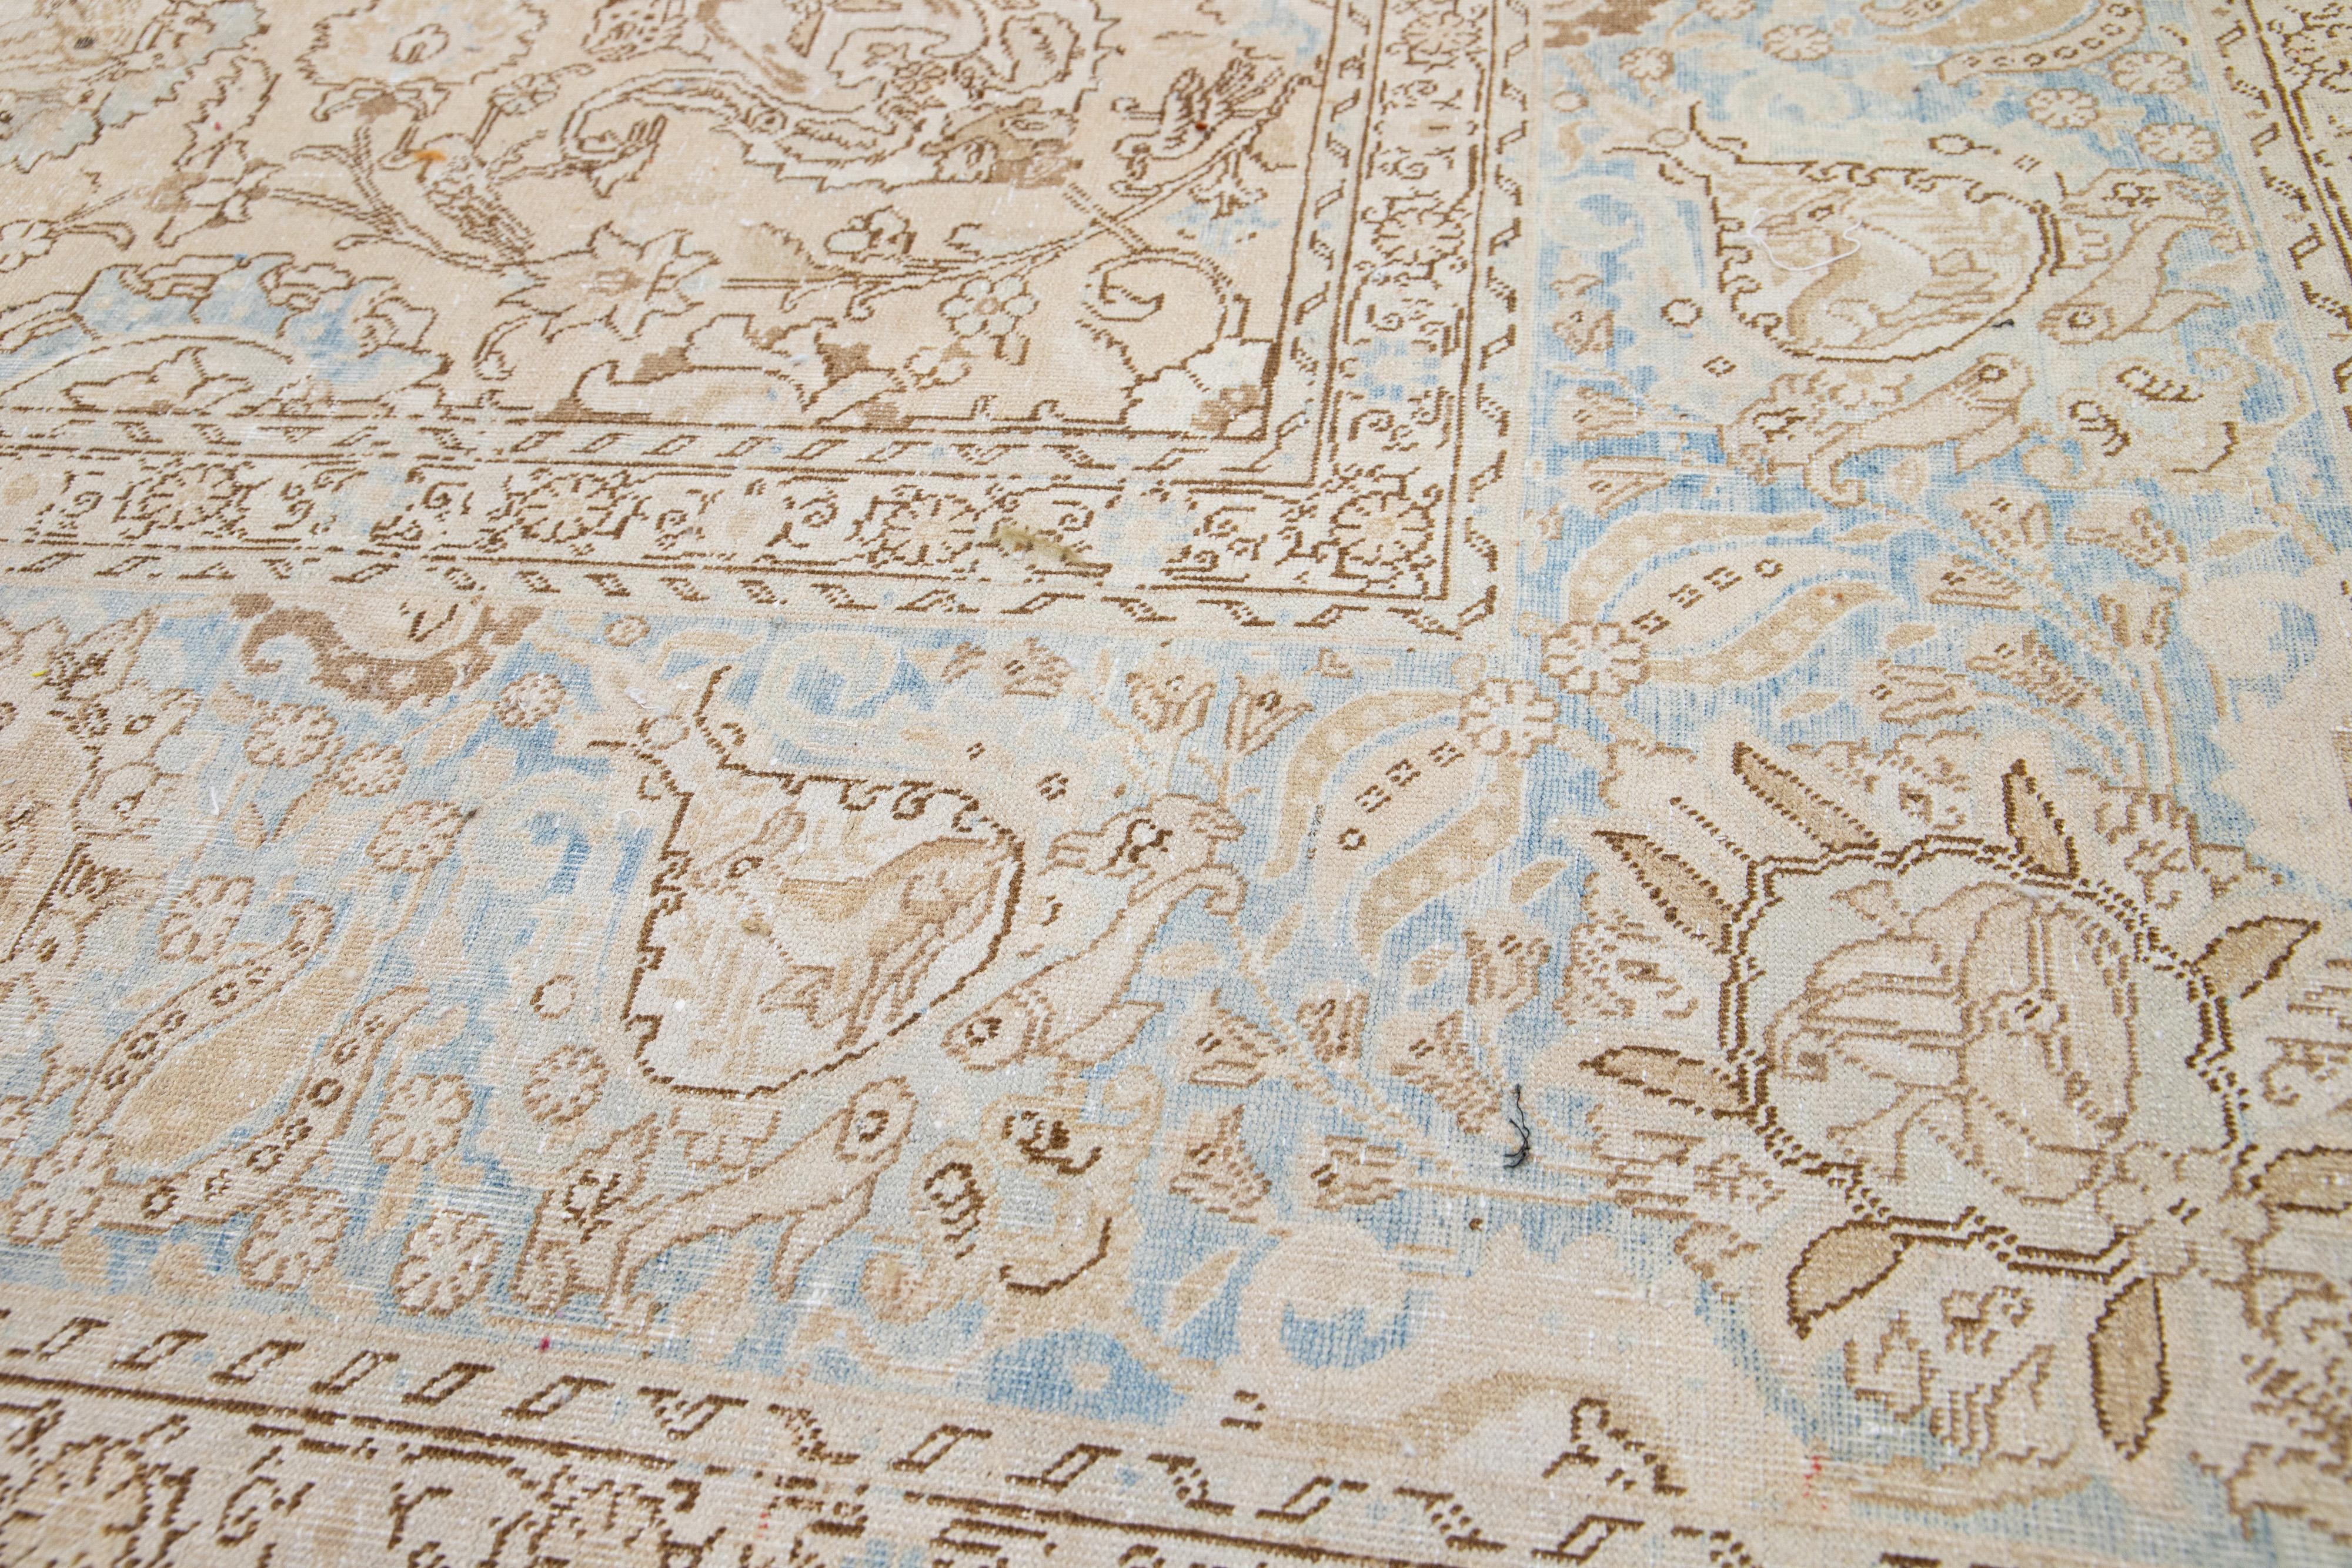 Hand-Knotted Allover Designed Antique Wool Rug Persian Tabriz From 1910s In Beige For Sale